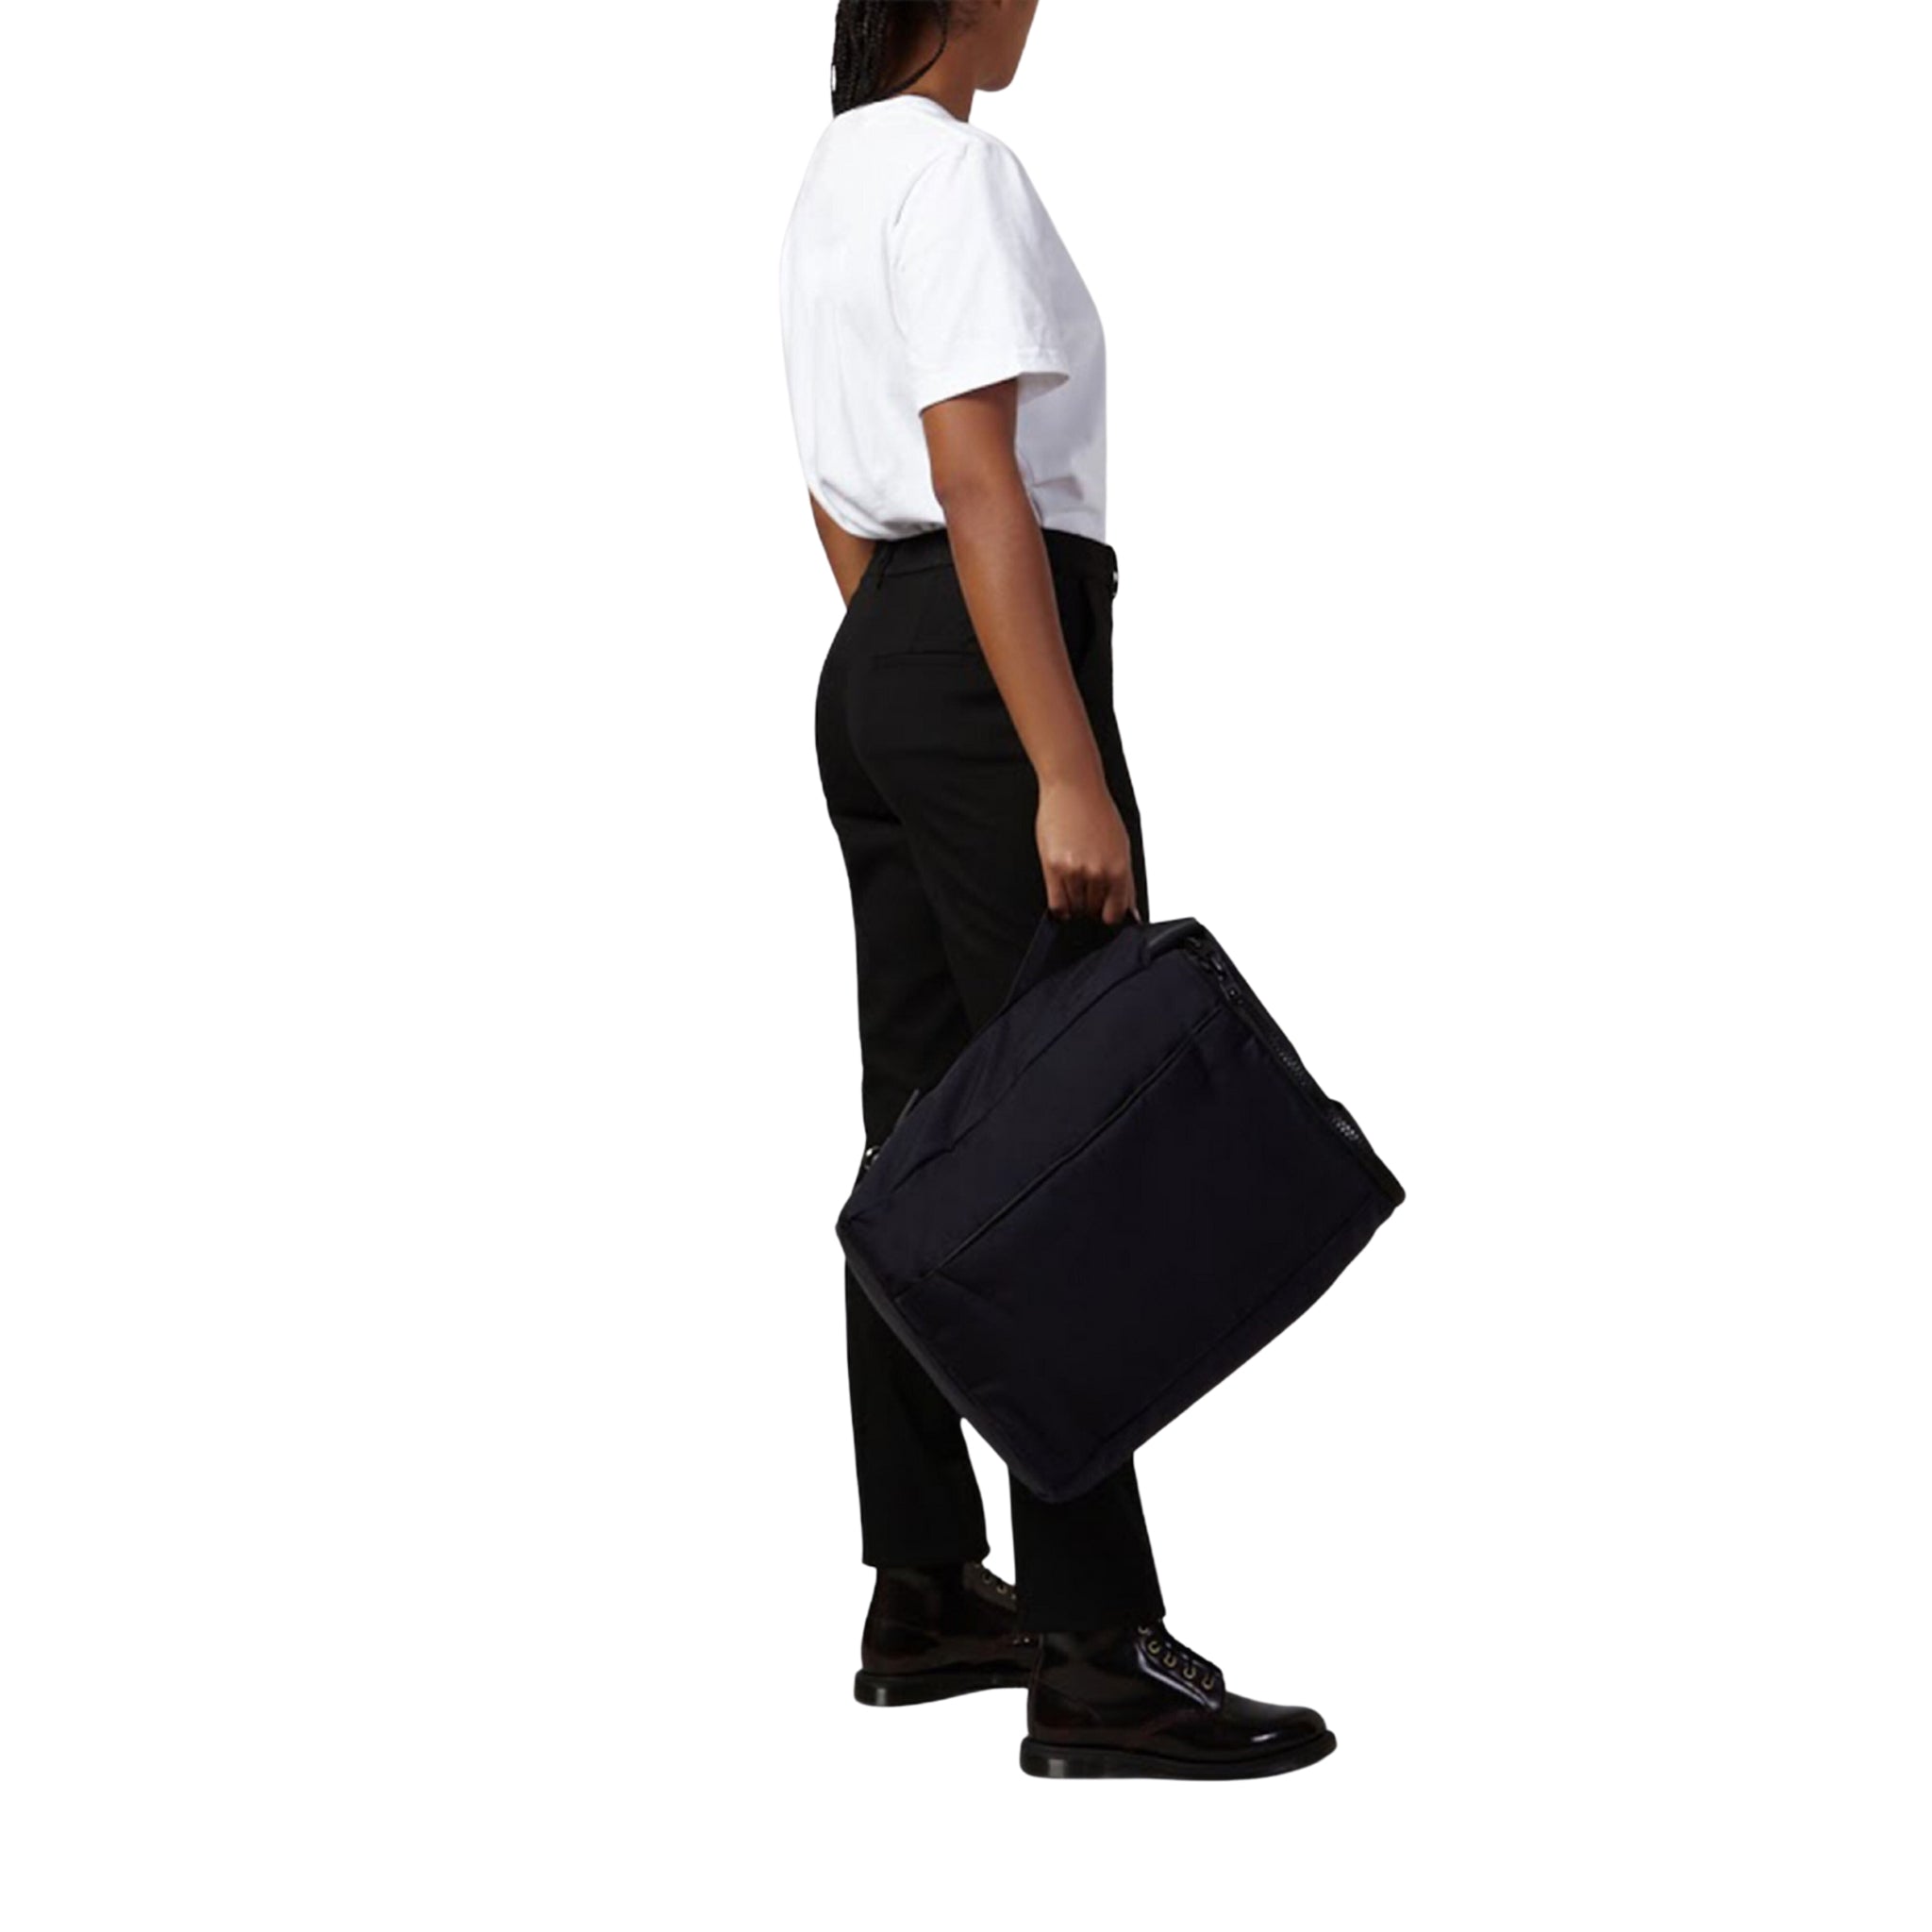 female side view of a Bedi' "second life" program navy utilitarian style backpack against a white background